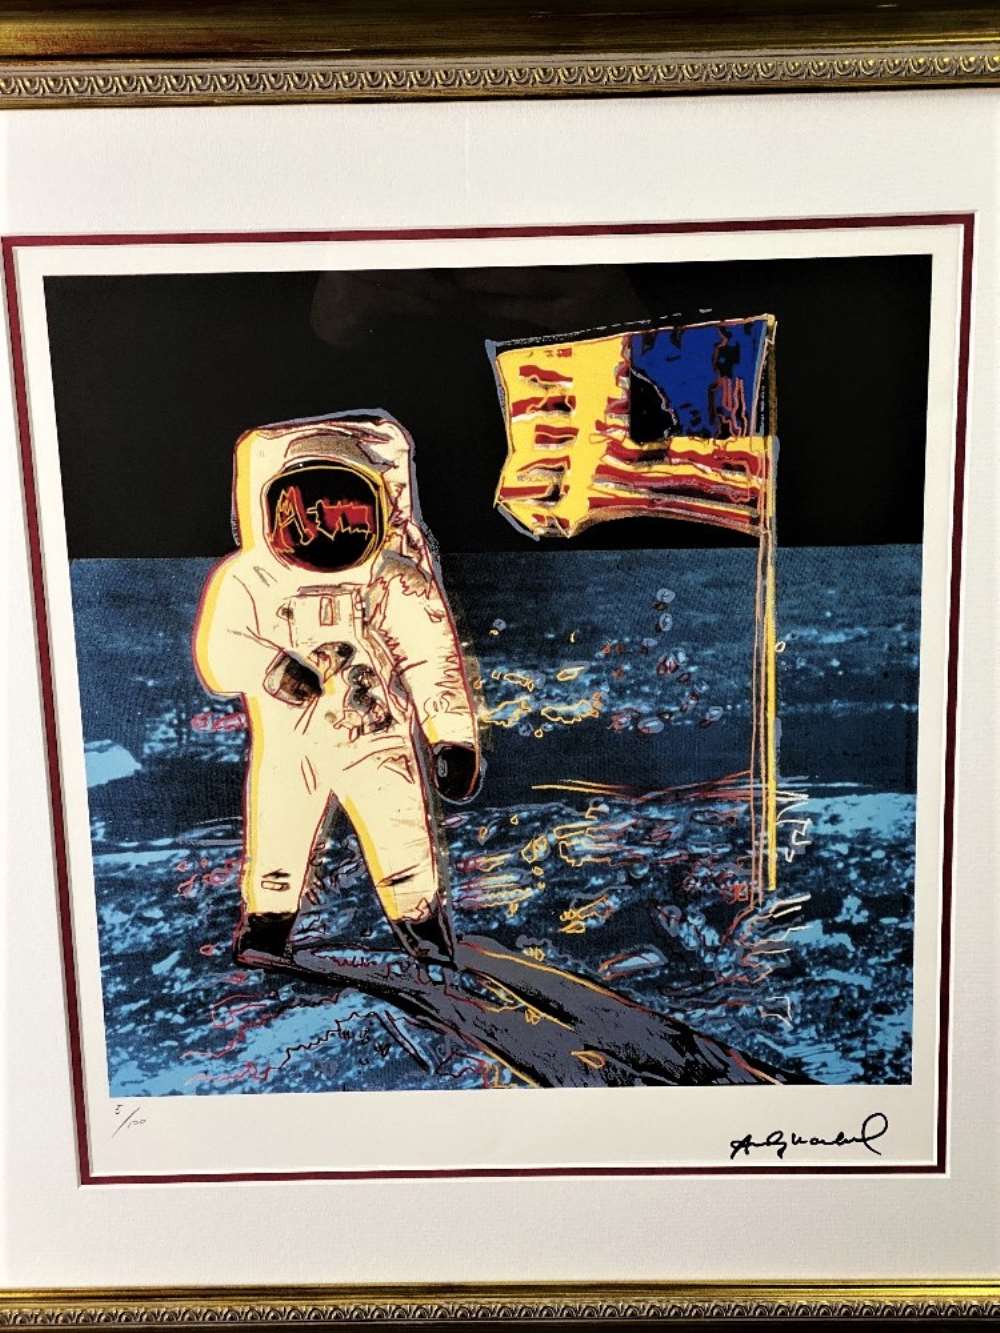 Andy Warhol (1928-1987) “Man on the Moon” Leo Castelli Gallery Lithograph #93/100 - Image 2 of 5